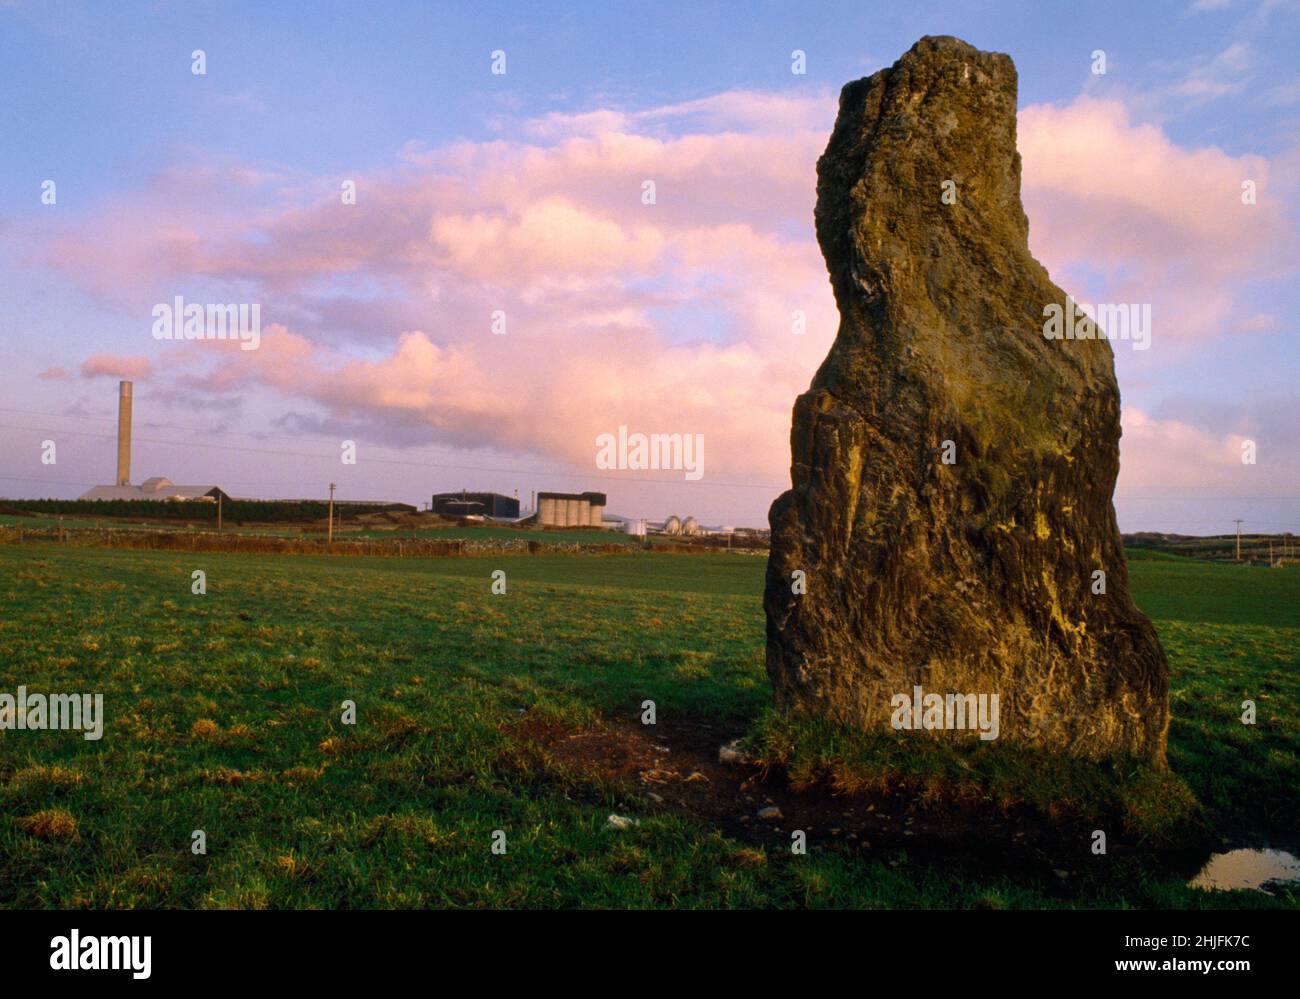 View S of the Ty Mawr Bronze Age standing stone, 640m NW of Trefignath burial chamber, Holyhead, Anglesey, Wales, UK. Now in Parc Cybi retail park. Stock Photo